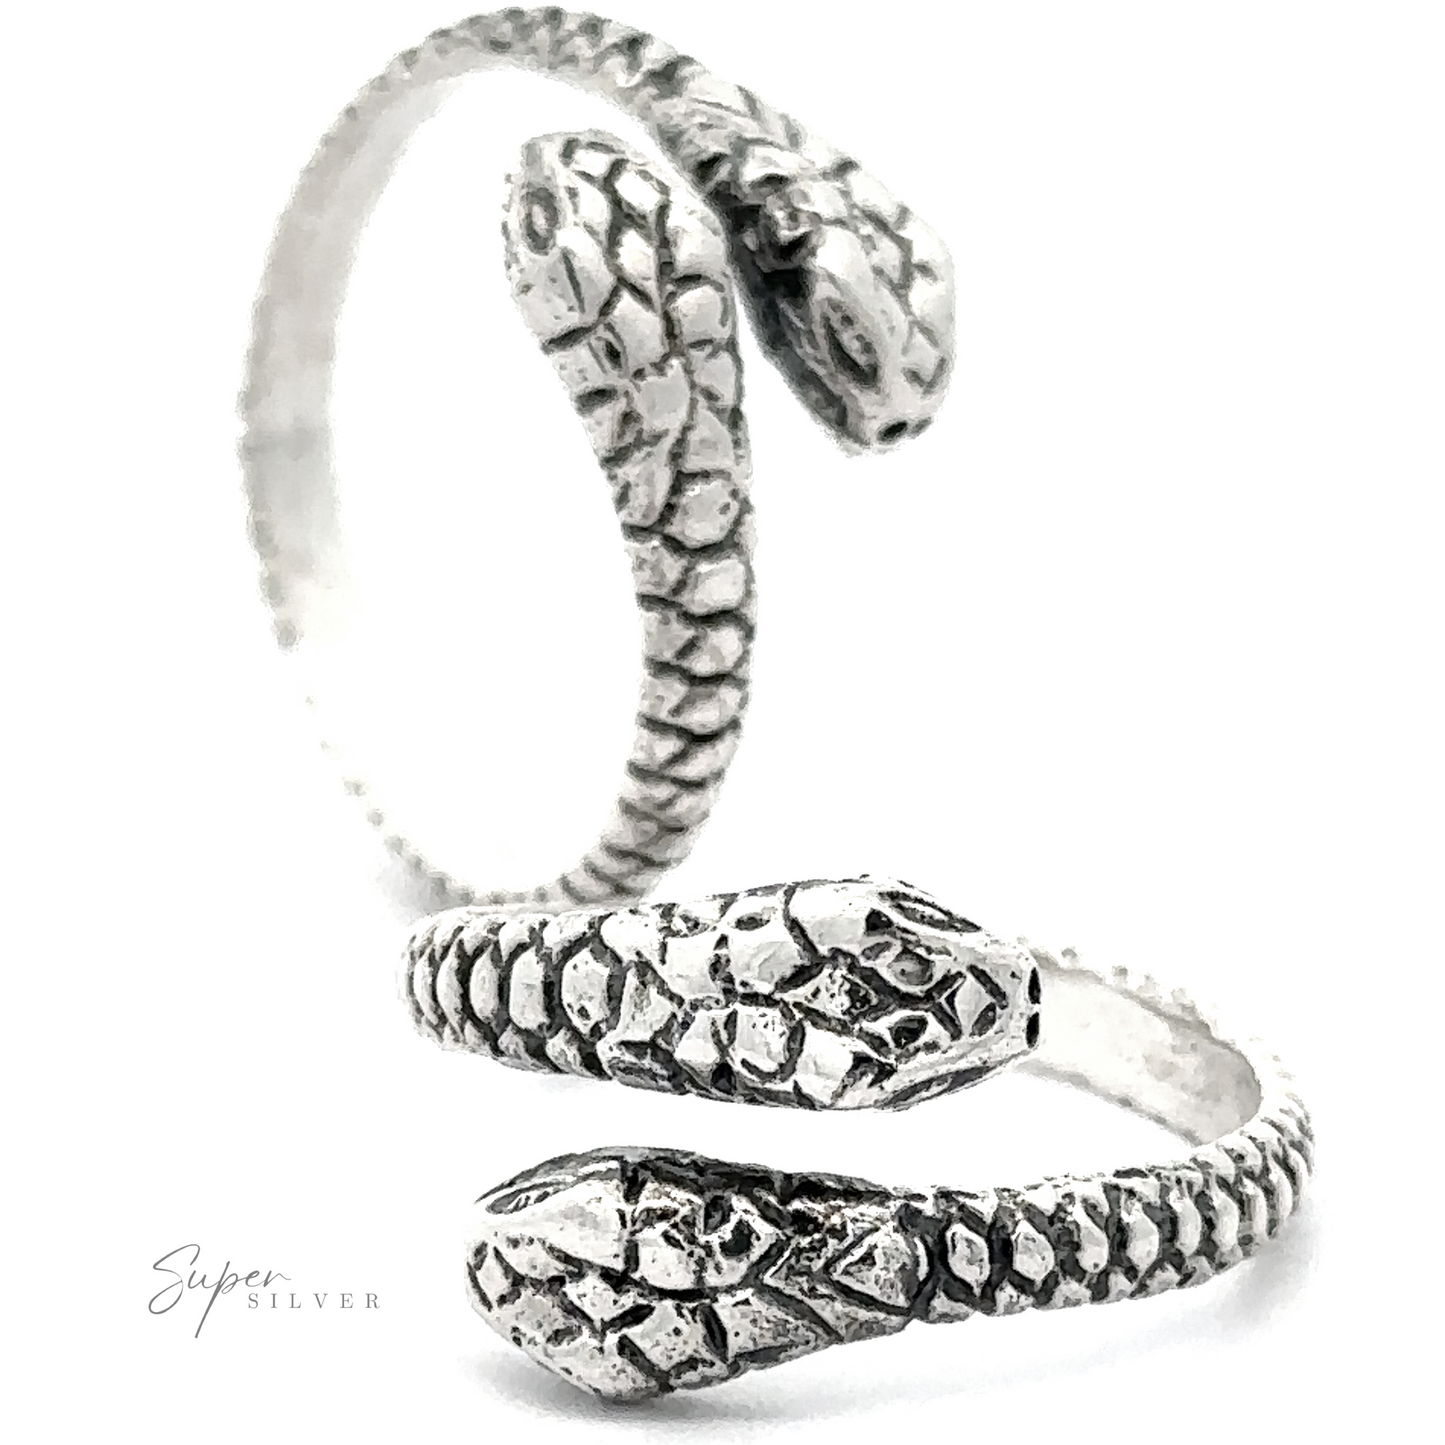 A close-up of a Sterling Silver Two Headed Snake Ring with textured scales and head details, set against a white background.